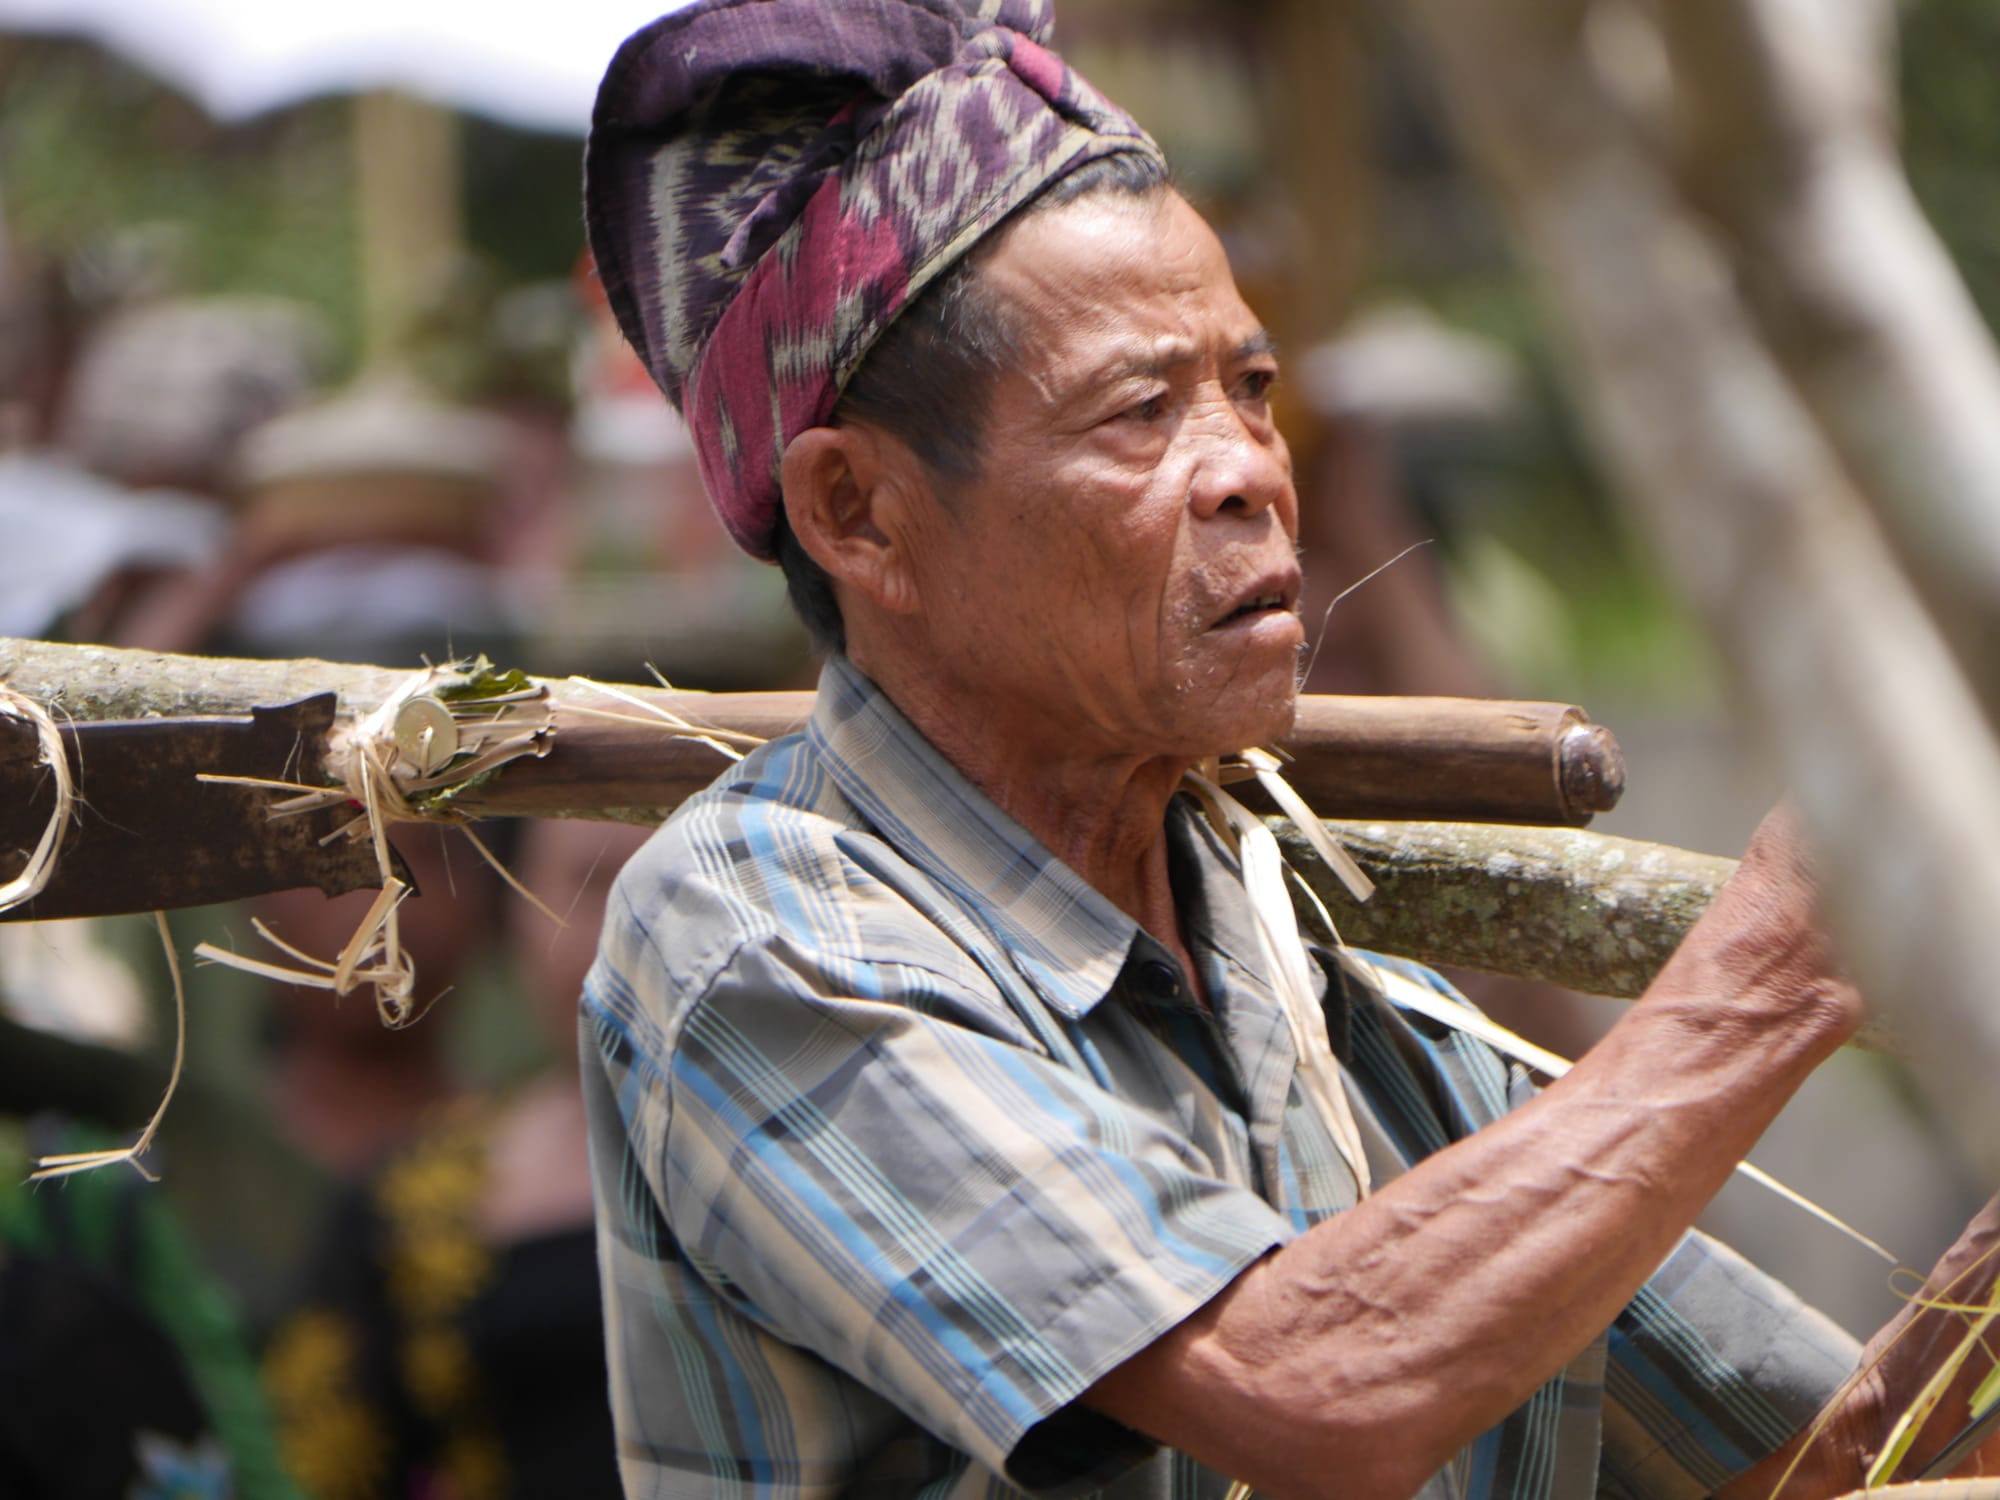 Photo by Author — a mourner at a cremation procession in Bali